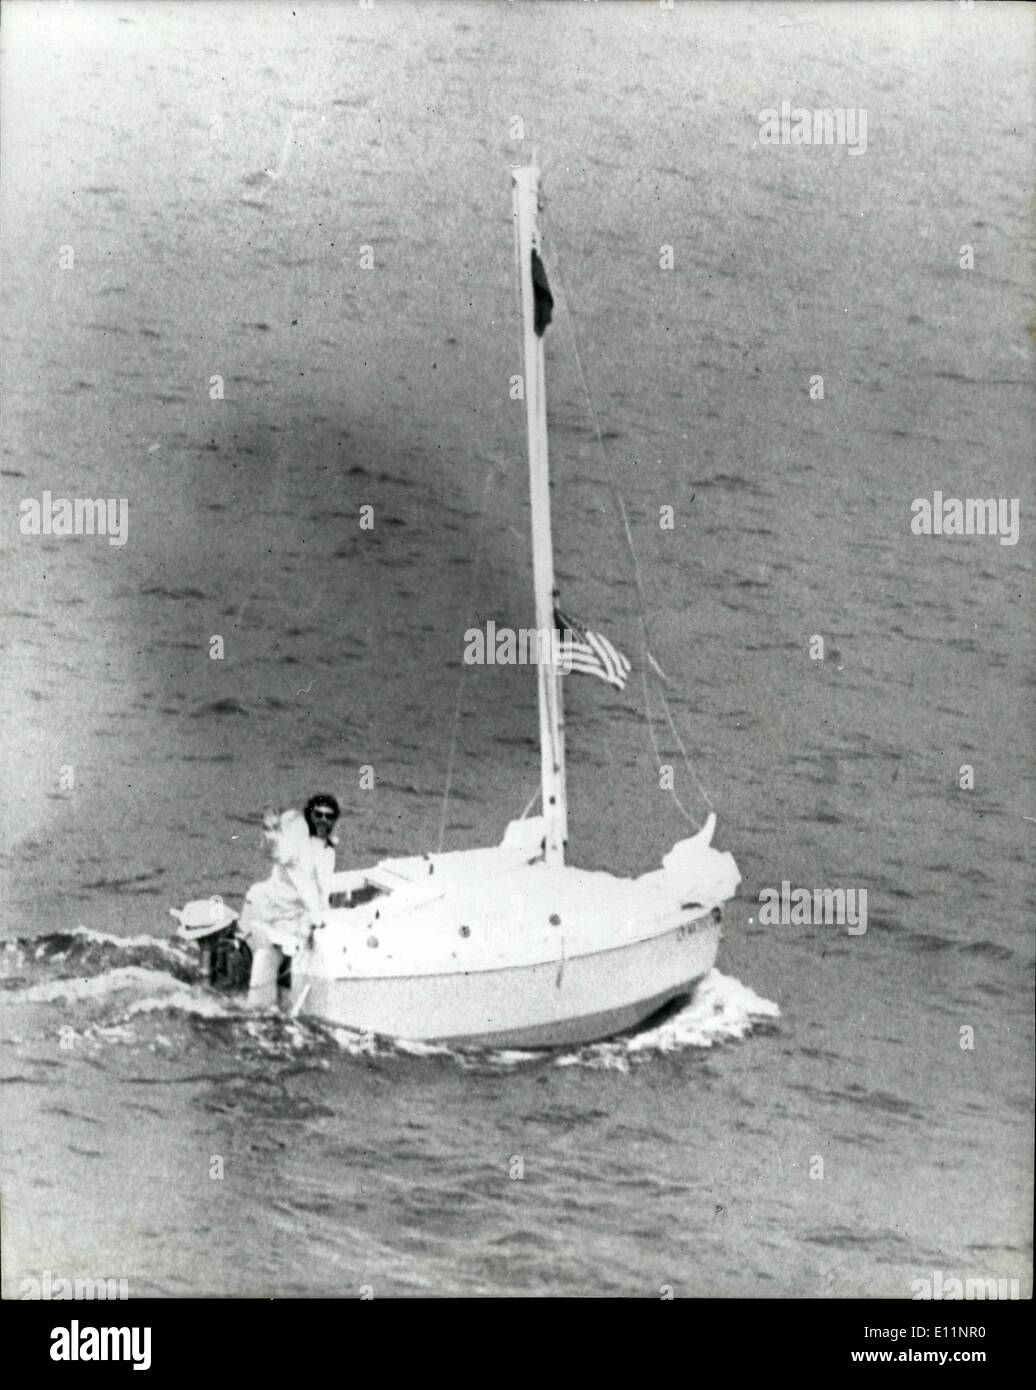 Jul. 07, 1979 - Bathclub' Sailor At Falmouth: Gerry Spiess, 39, sailed his home made 10 foot by five foot ''bathtub'' yacht into a great welcome at Falmouth, yesterday after crossing the Atlantic in 54-days. Hundreds watched as the blue Yankee Girl flying the stars and Stripes, and British came into harbour after its 3,200 mile voyage. Mr. Soiess who comes from Minnesota, was met by his 37-year-old wife Sally, and his parents. Photo Shows Gerry Spiess sailing his 10ft boat 'Yankee Girl' just before reaching Falmouth yesterday. Stock Photo